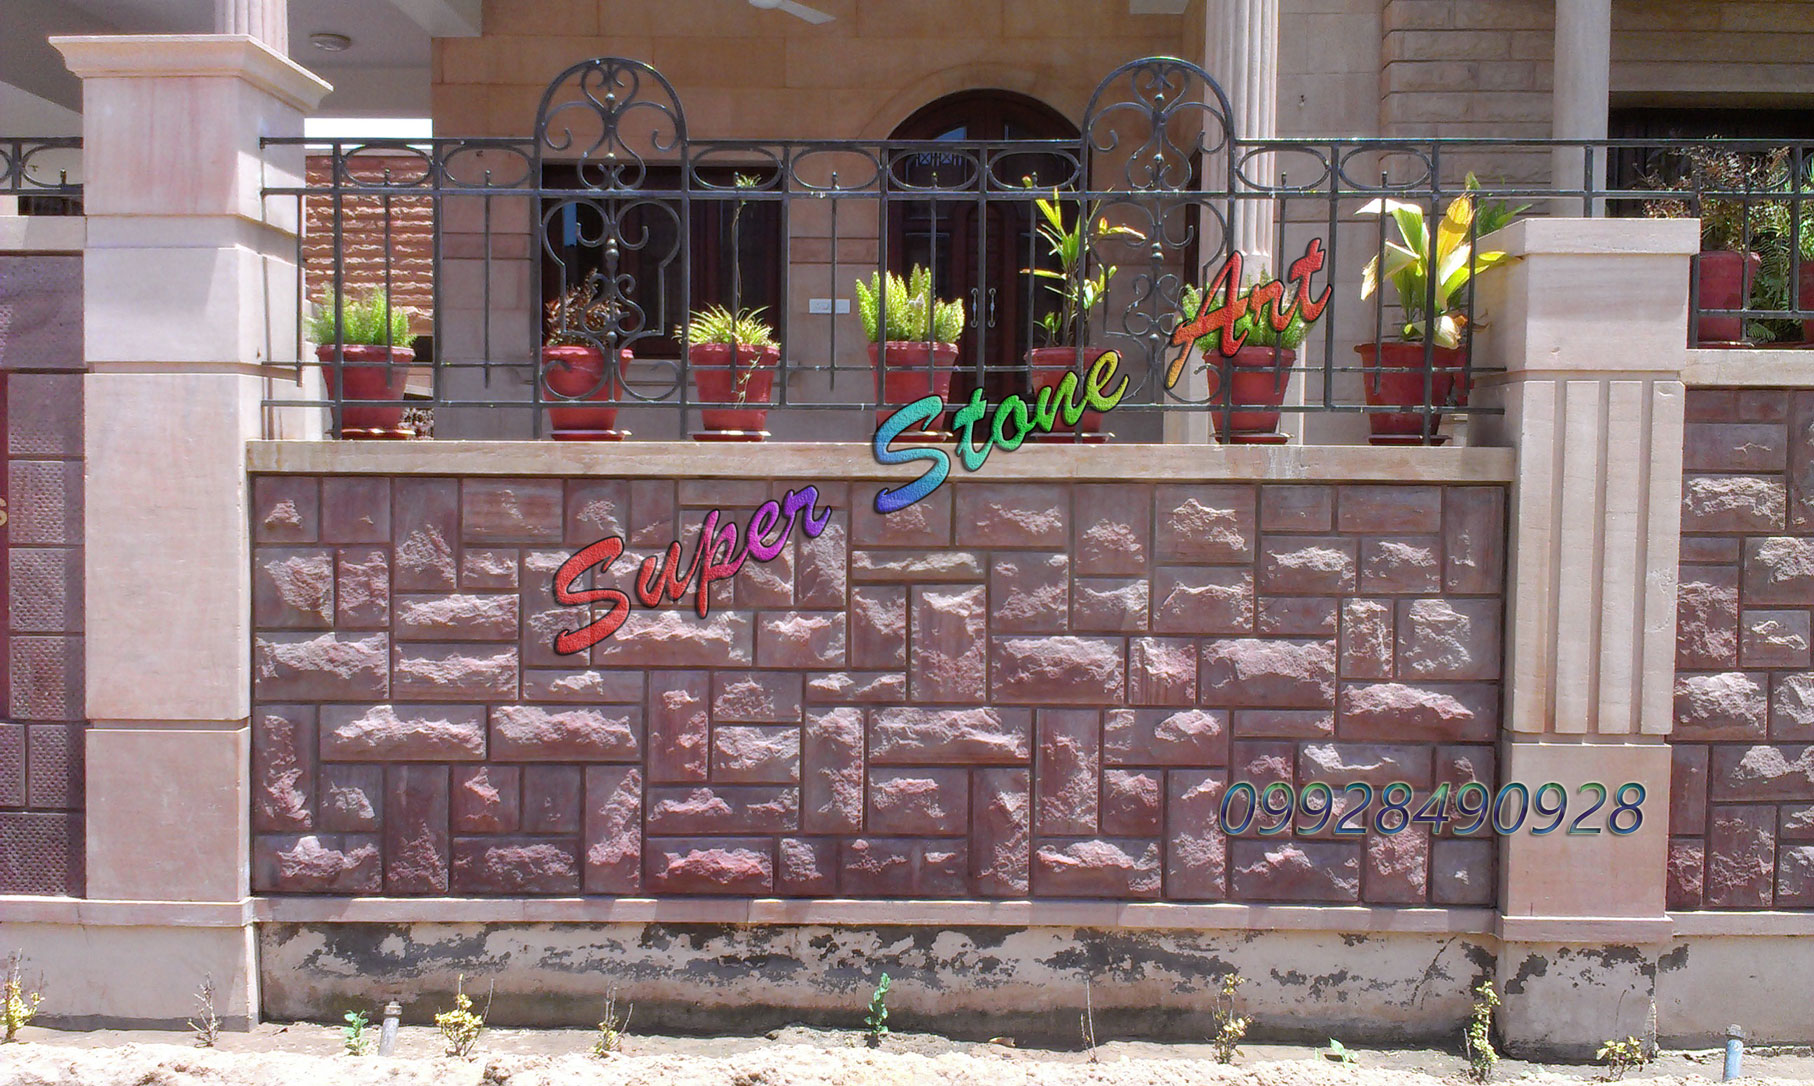 Compound Wall Boundary Boundary Wall Designs Compound Wall Design Stone Wall Ideas